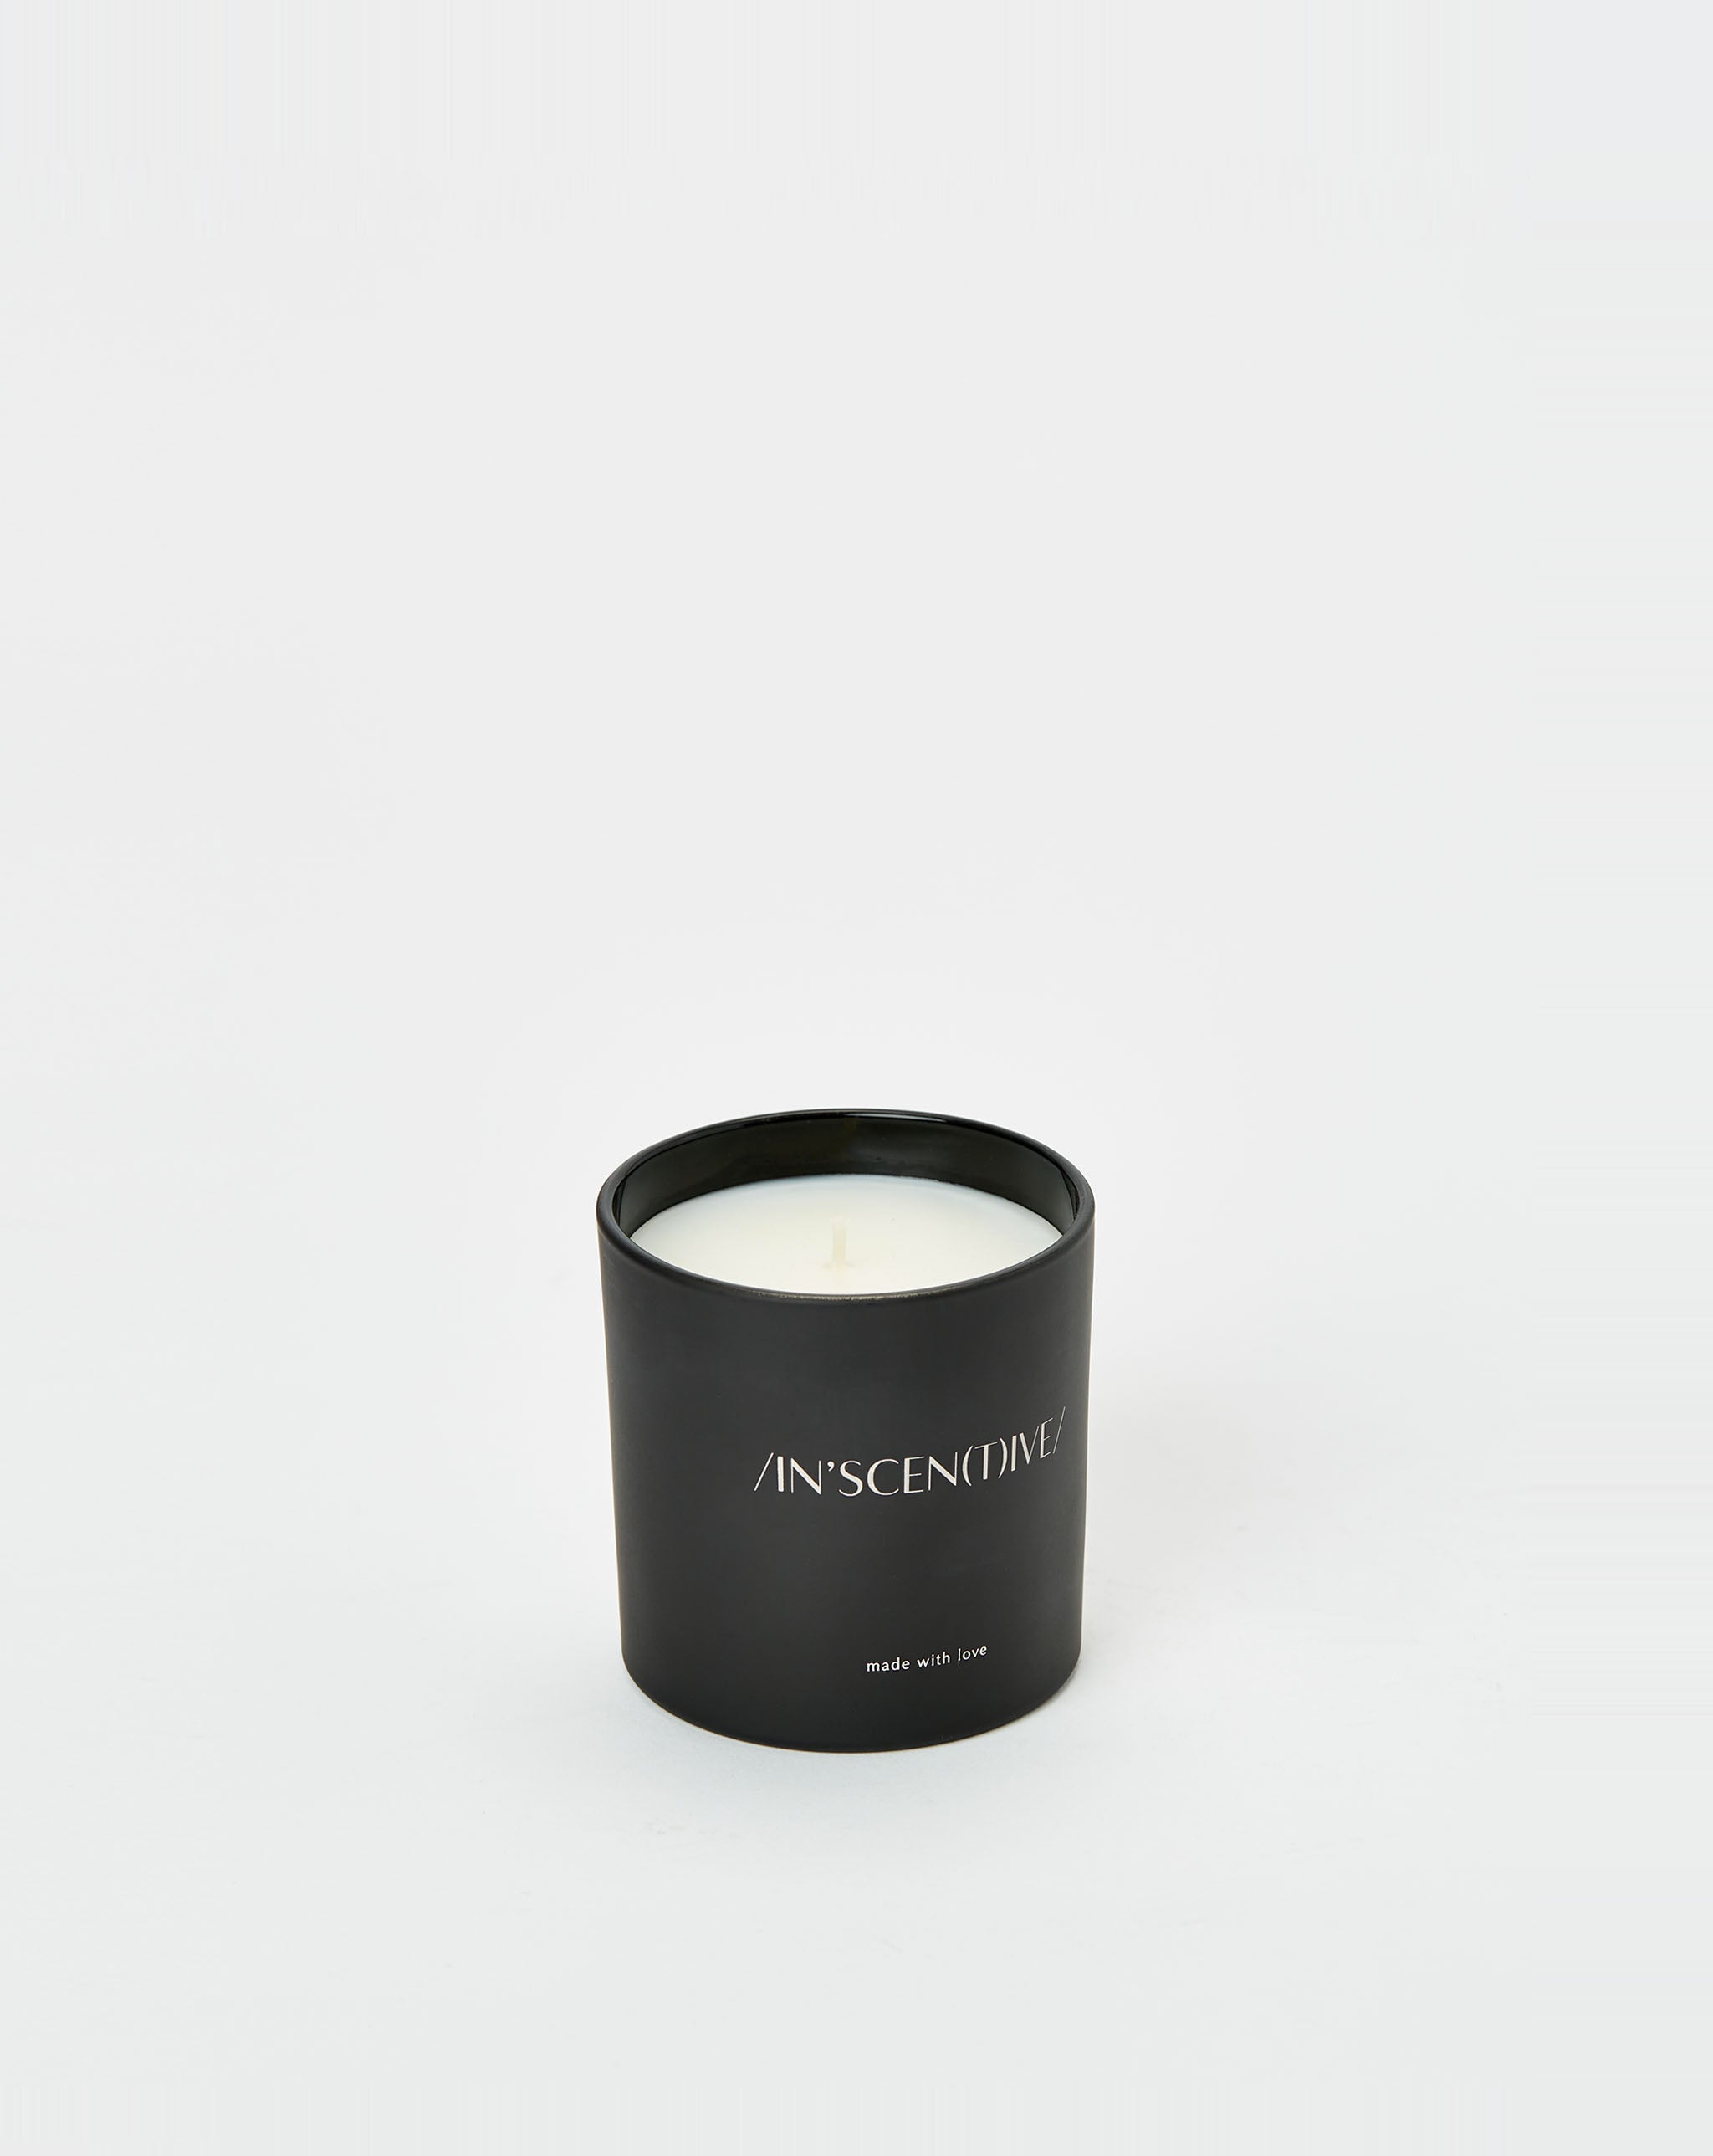 /IN'SCEN(T)IVE/ Rooted Candle  - XHIBITION